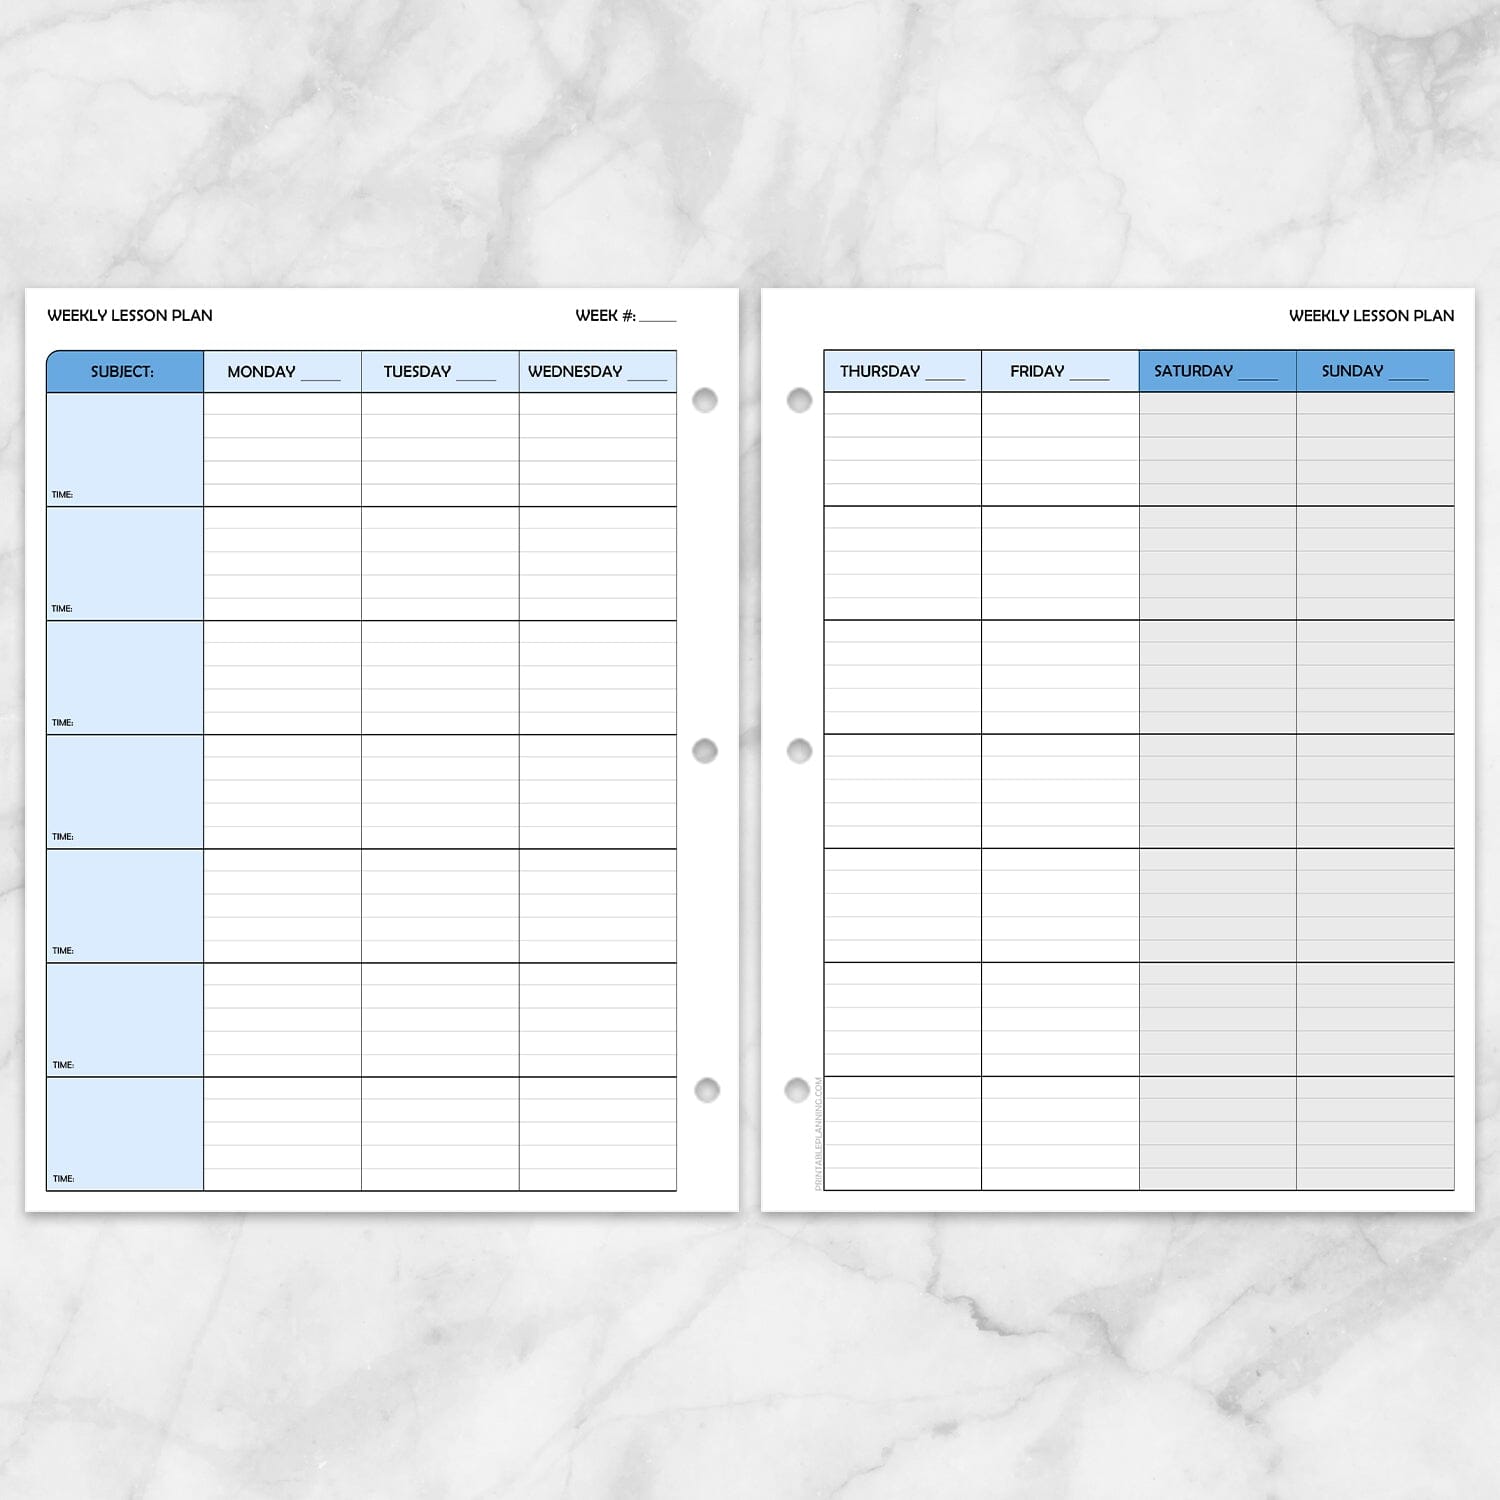 Printable Blue Weekly Lesson Plan for Teachers, School Planning Pages at Printable Planning. Front and back, facing pages, with 3-hole punch example.